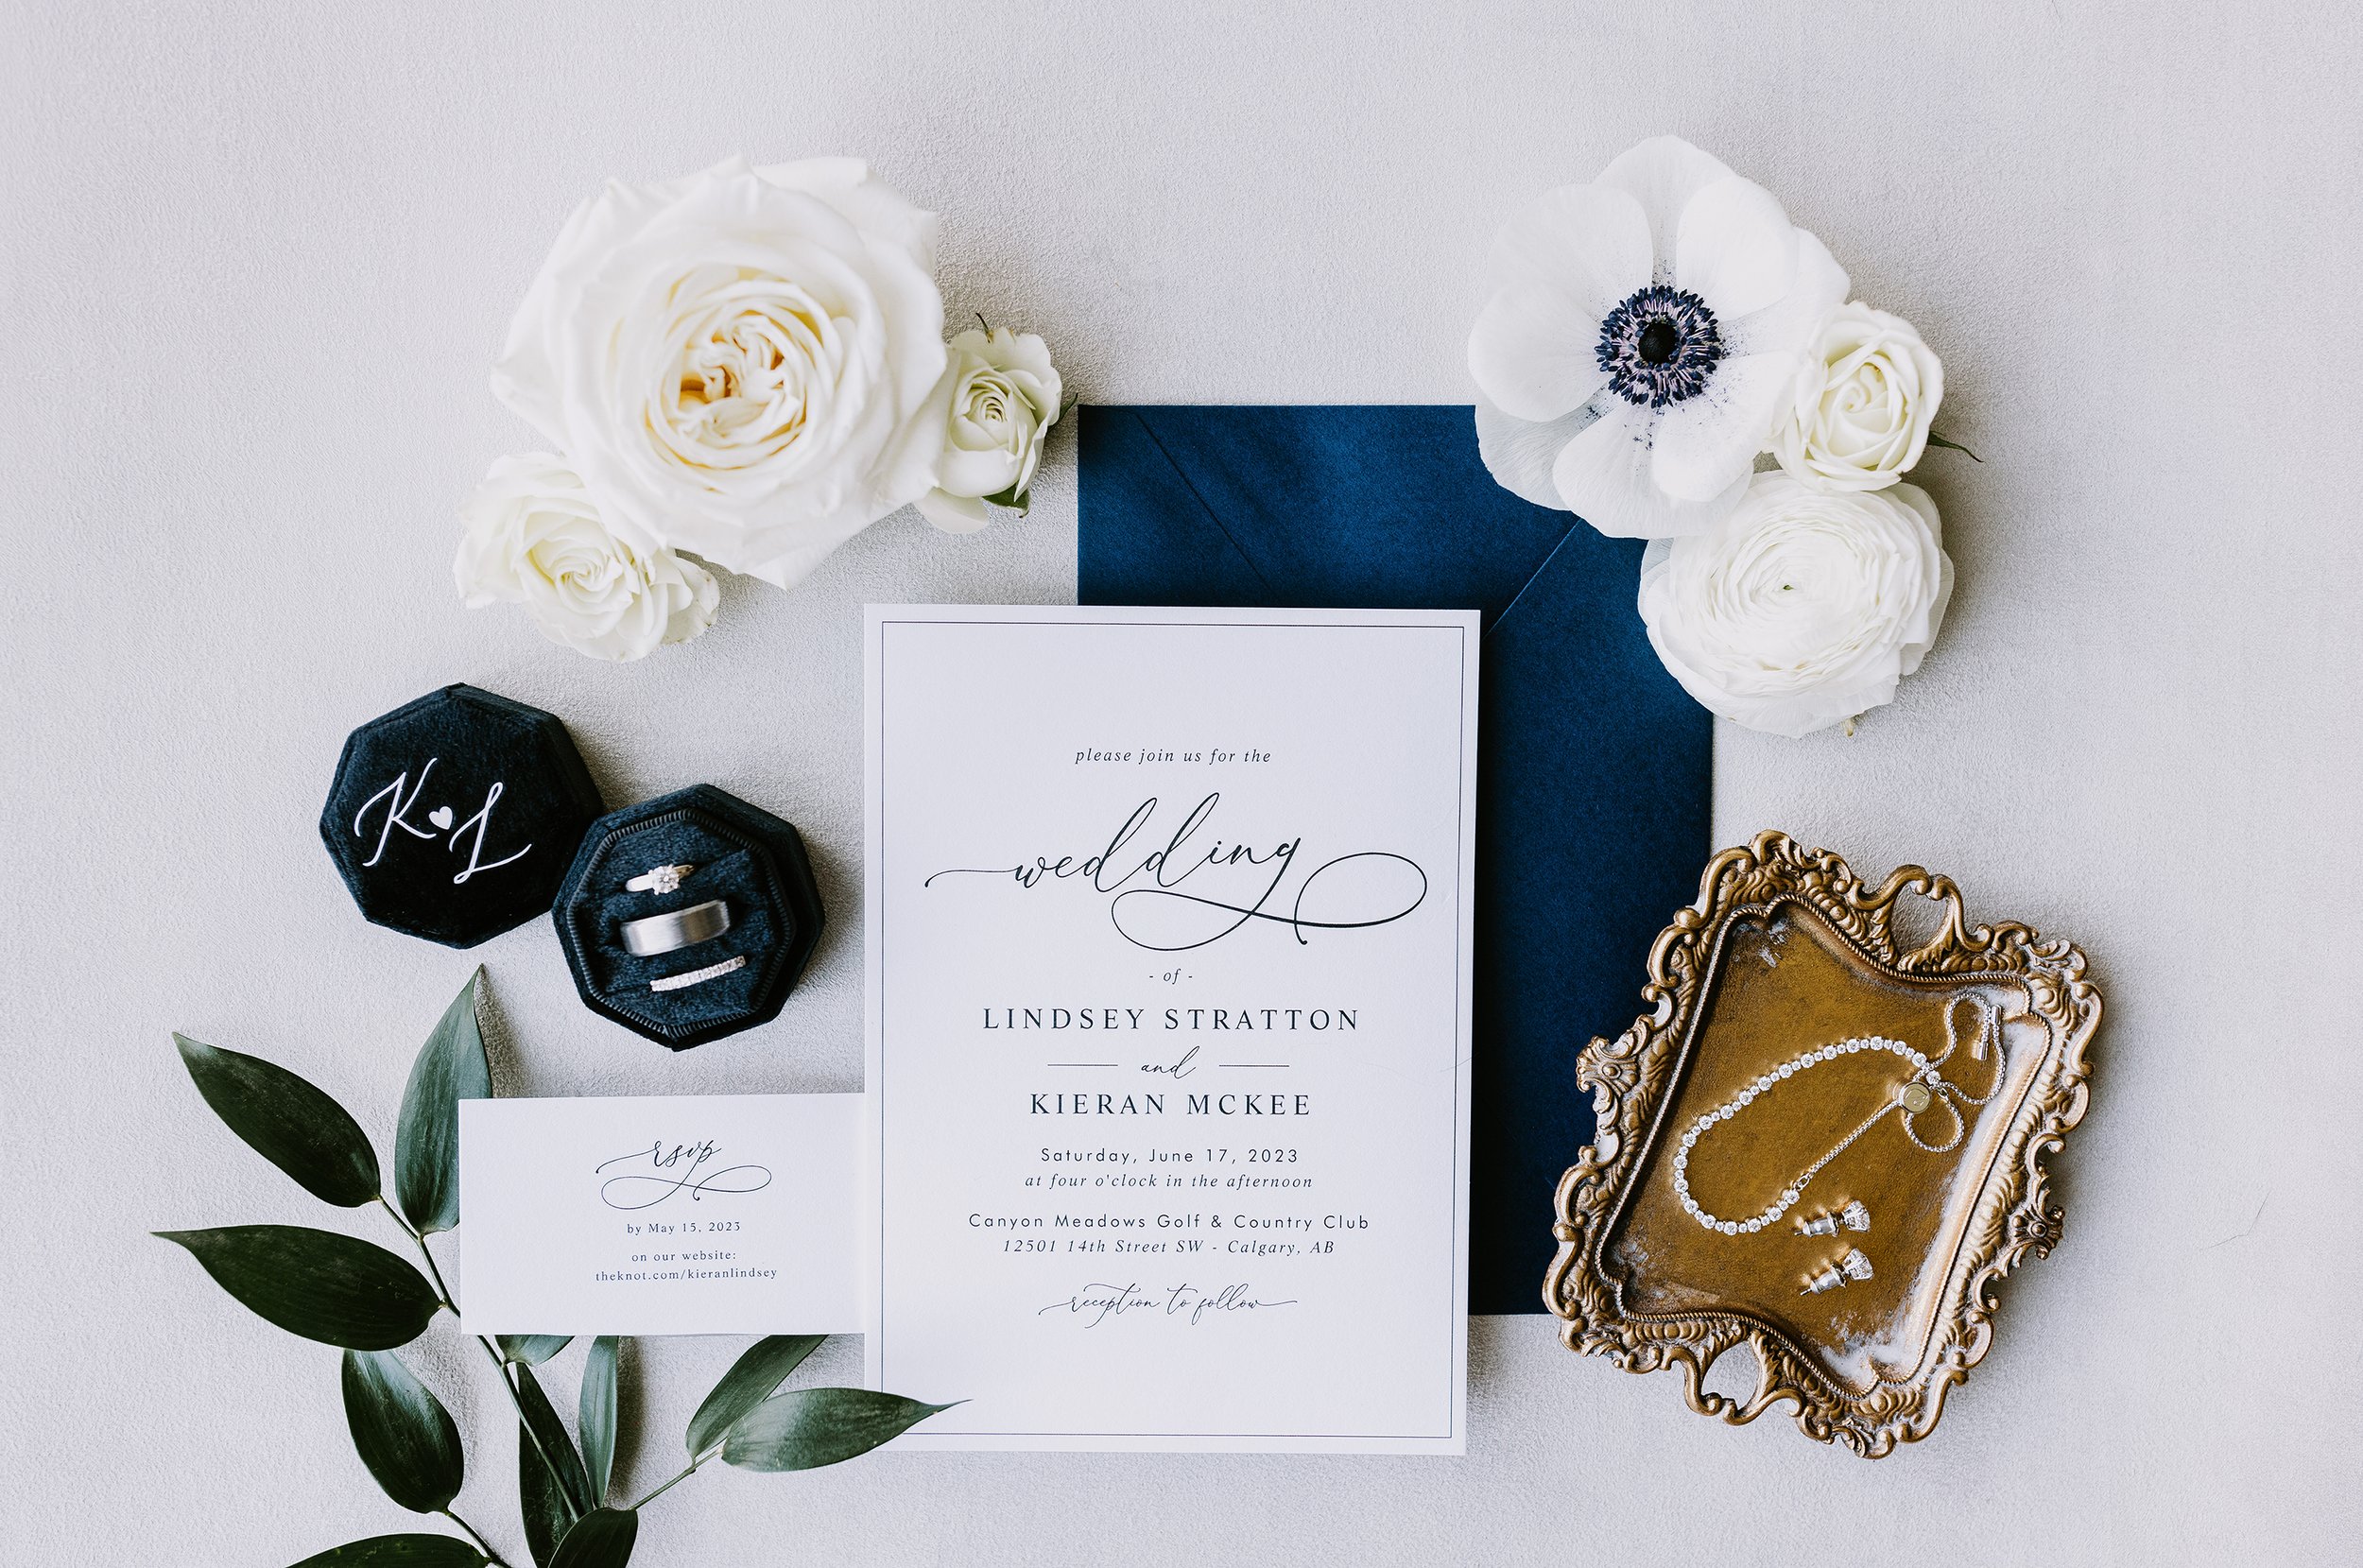 A styled wedding flat lay with an invitation, rings, jewelry and flowers